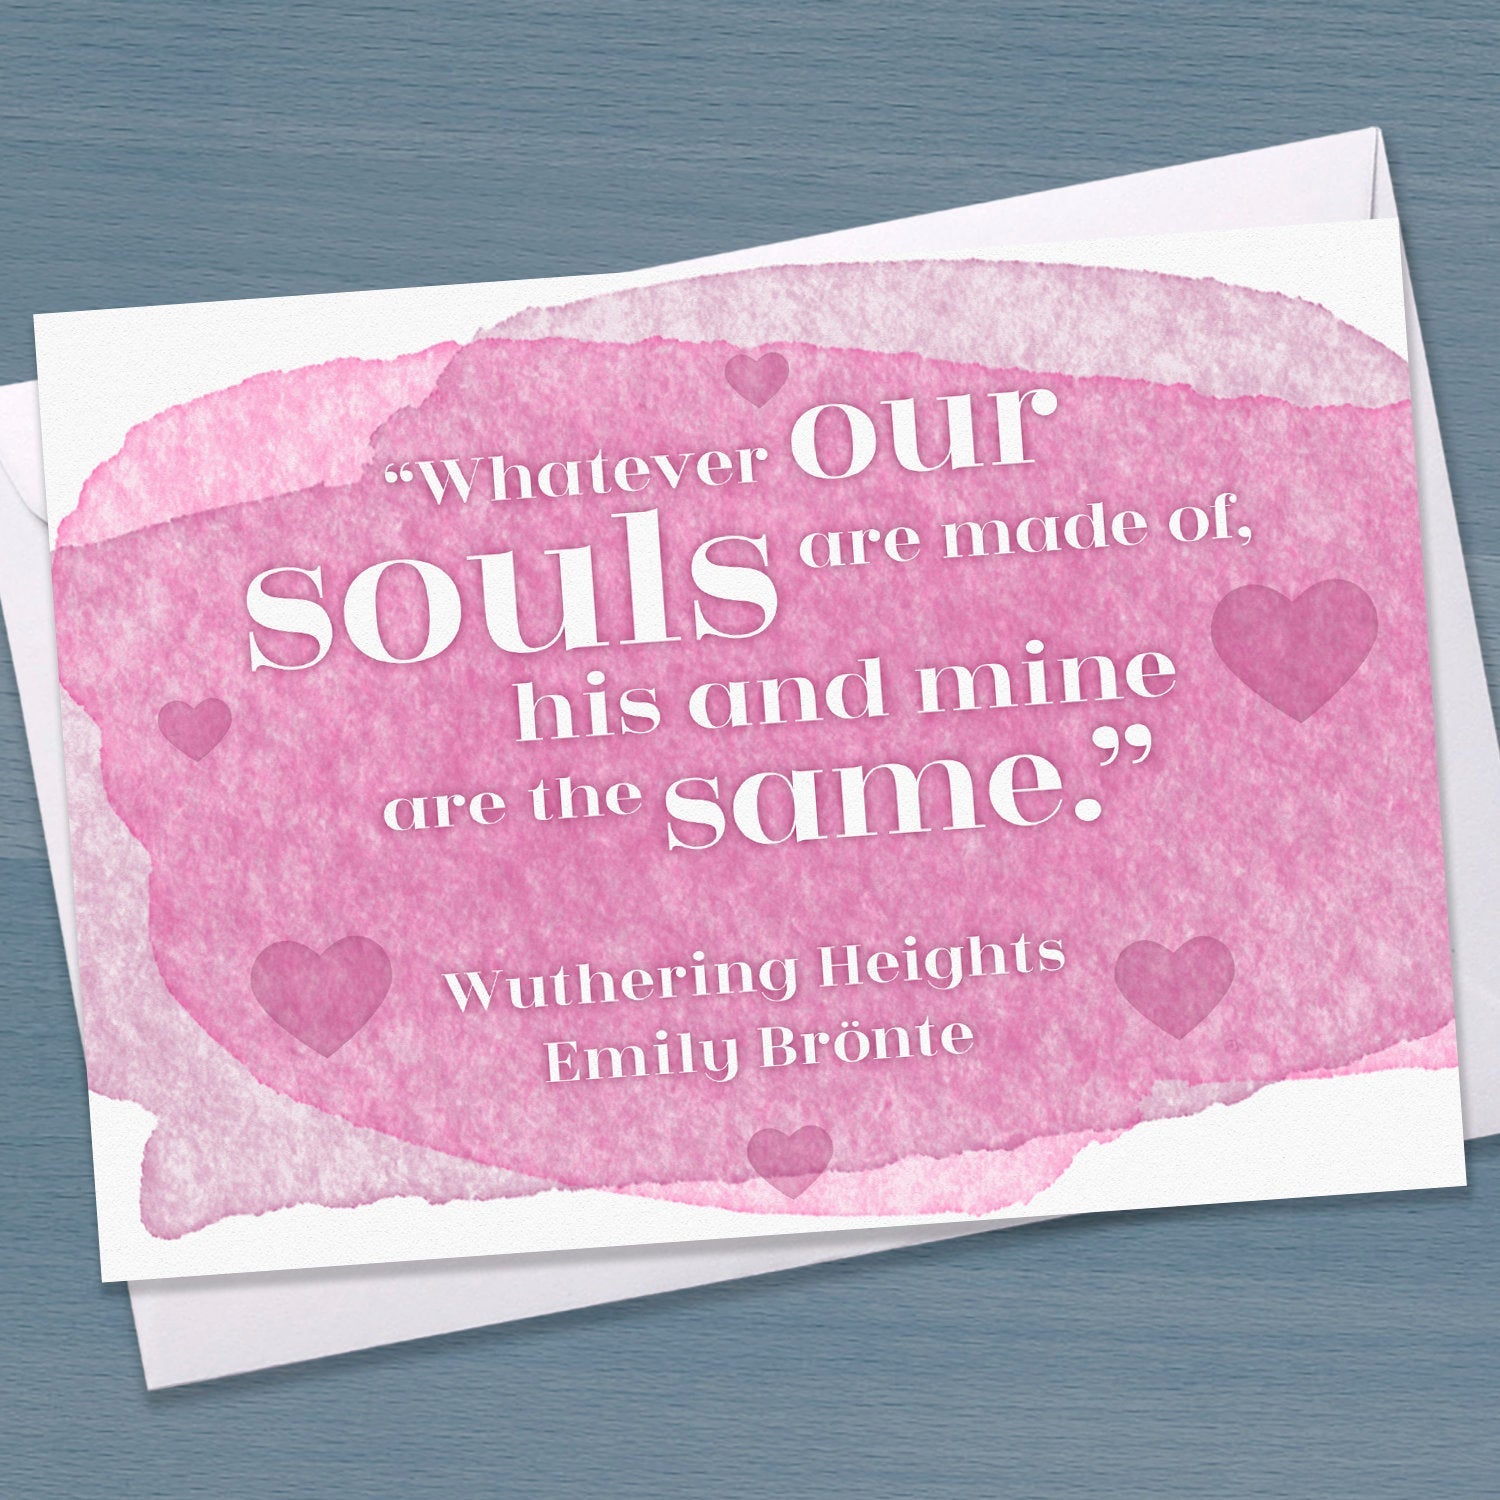 Literary Valentine Quote card - 'Whatever our souls are made of, his and mine are the same' Wuthering Heights, Emily Bronte